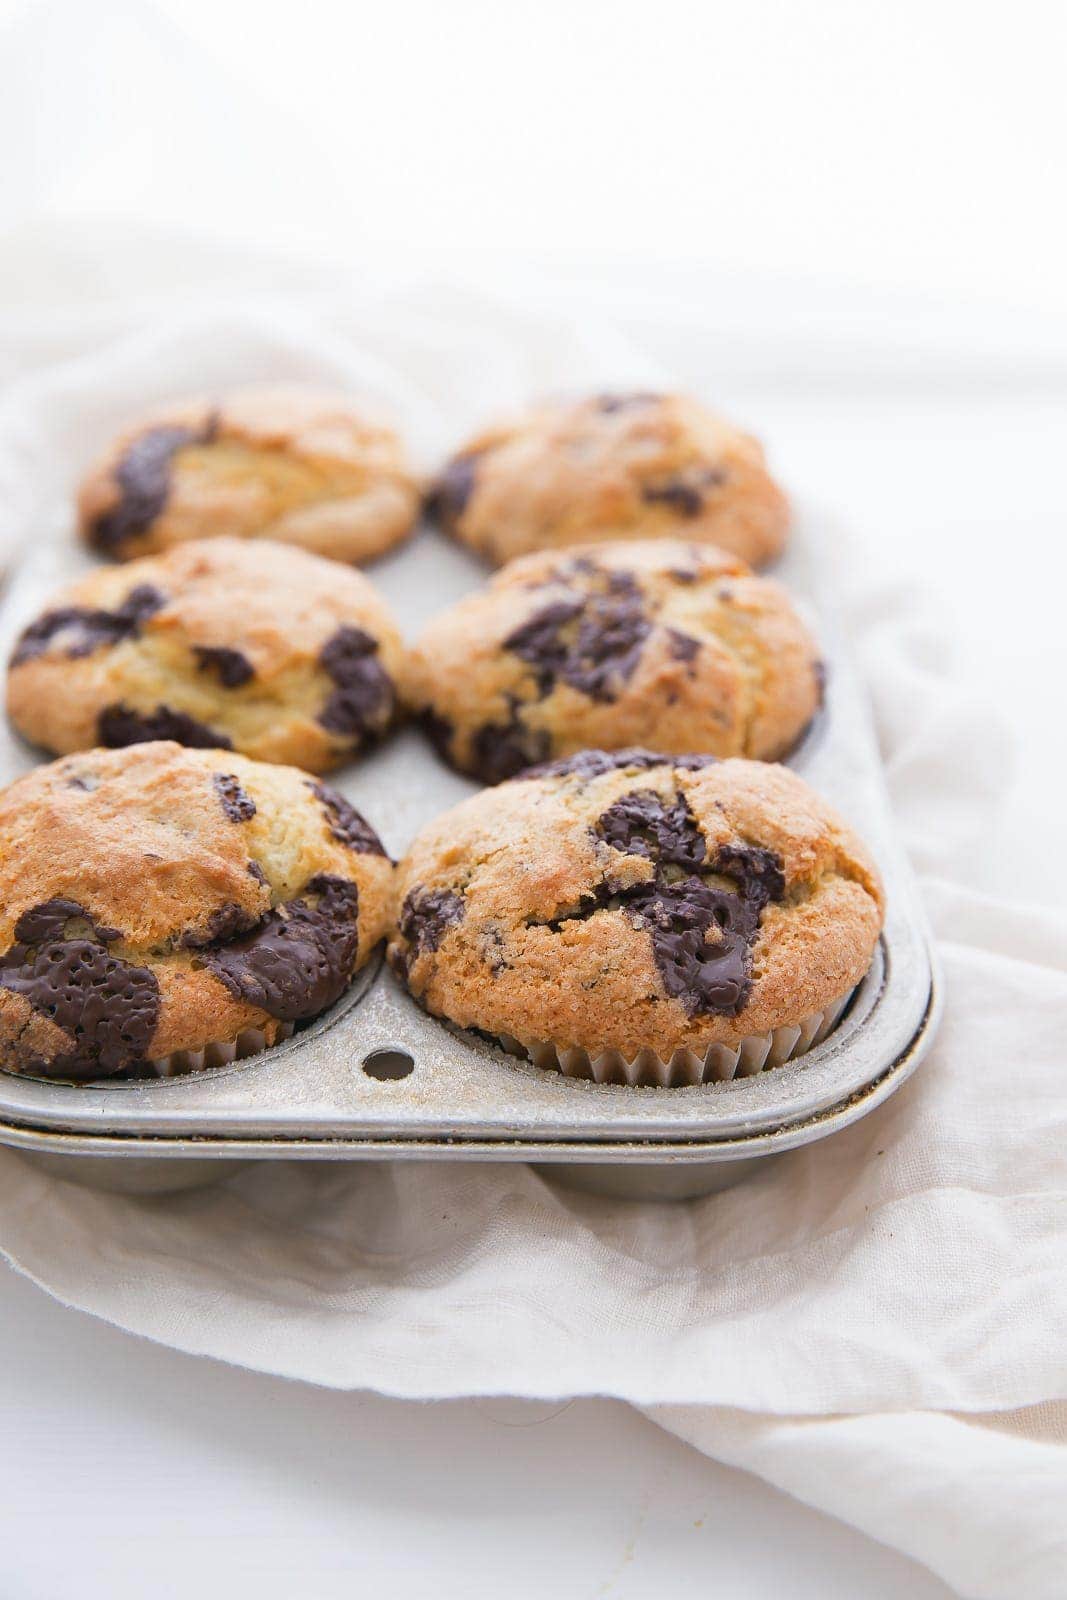 These bakery style chocolate chunk muffins are fluffy, buttery and just dense enough. Sounds like the perfect breakfast to me.